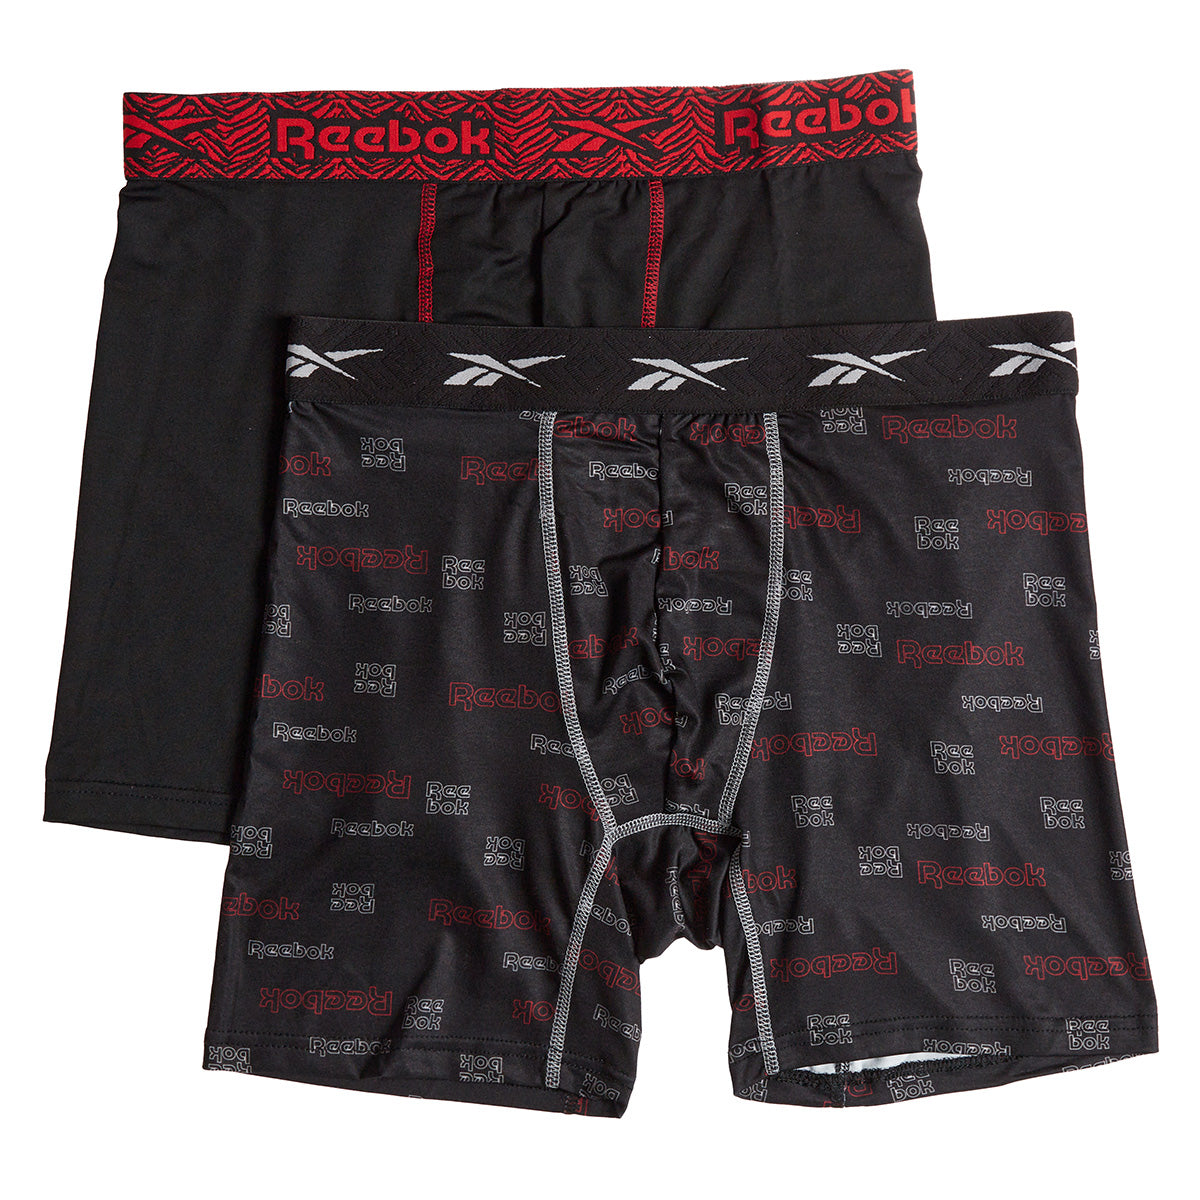 Reebok Men's Performance Boxer Briefs are 45% off at Proozy with